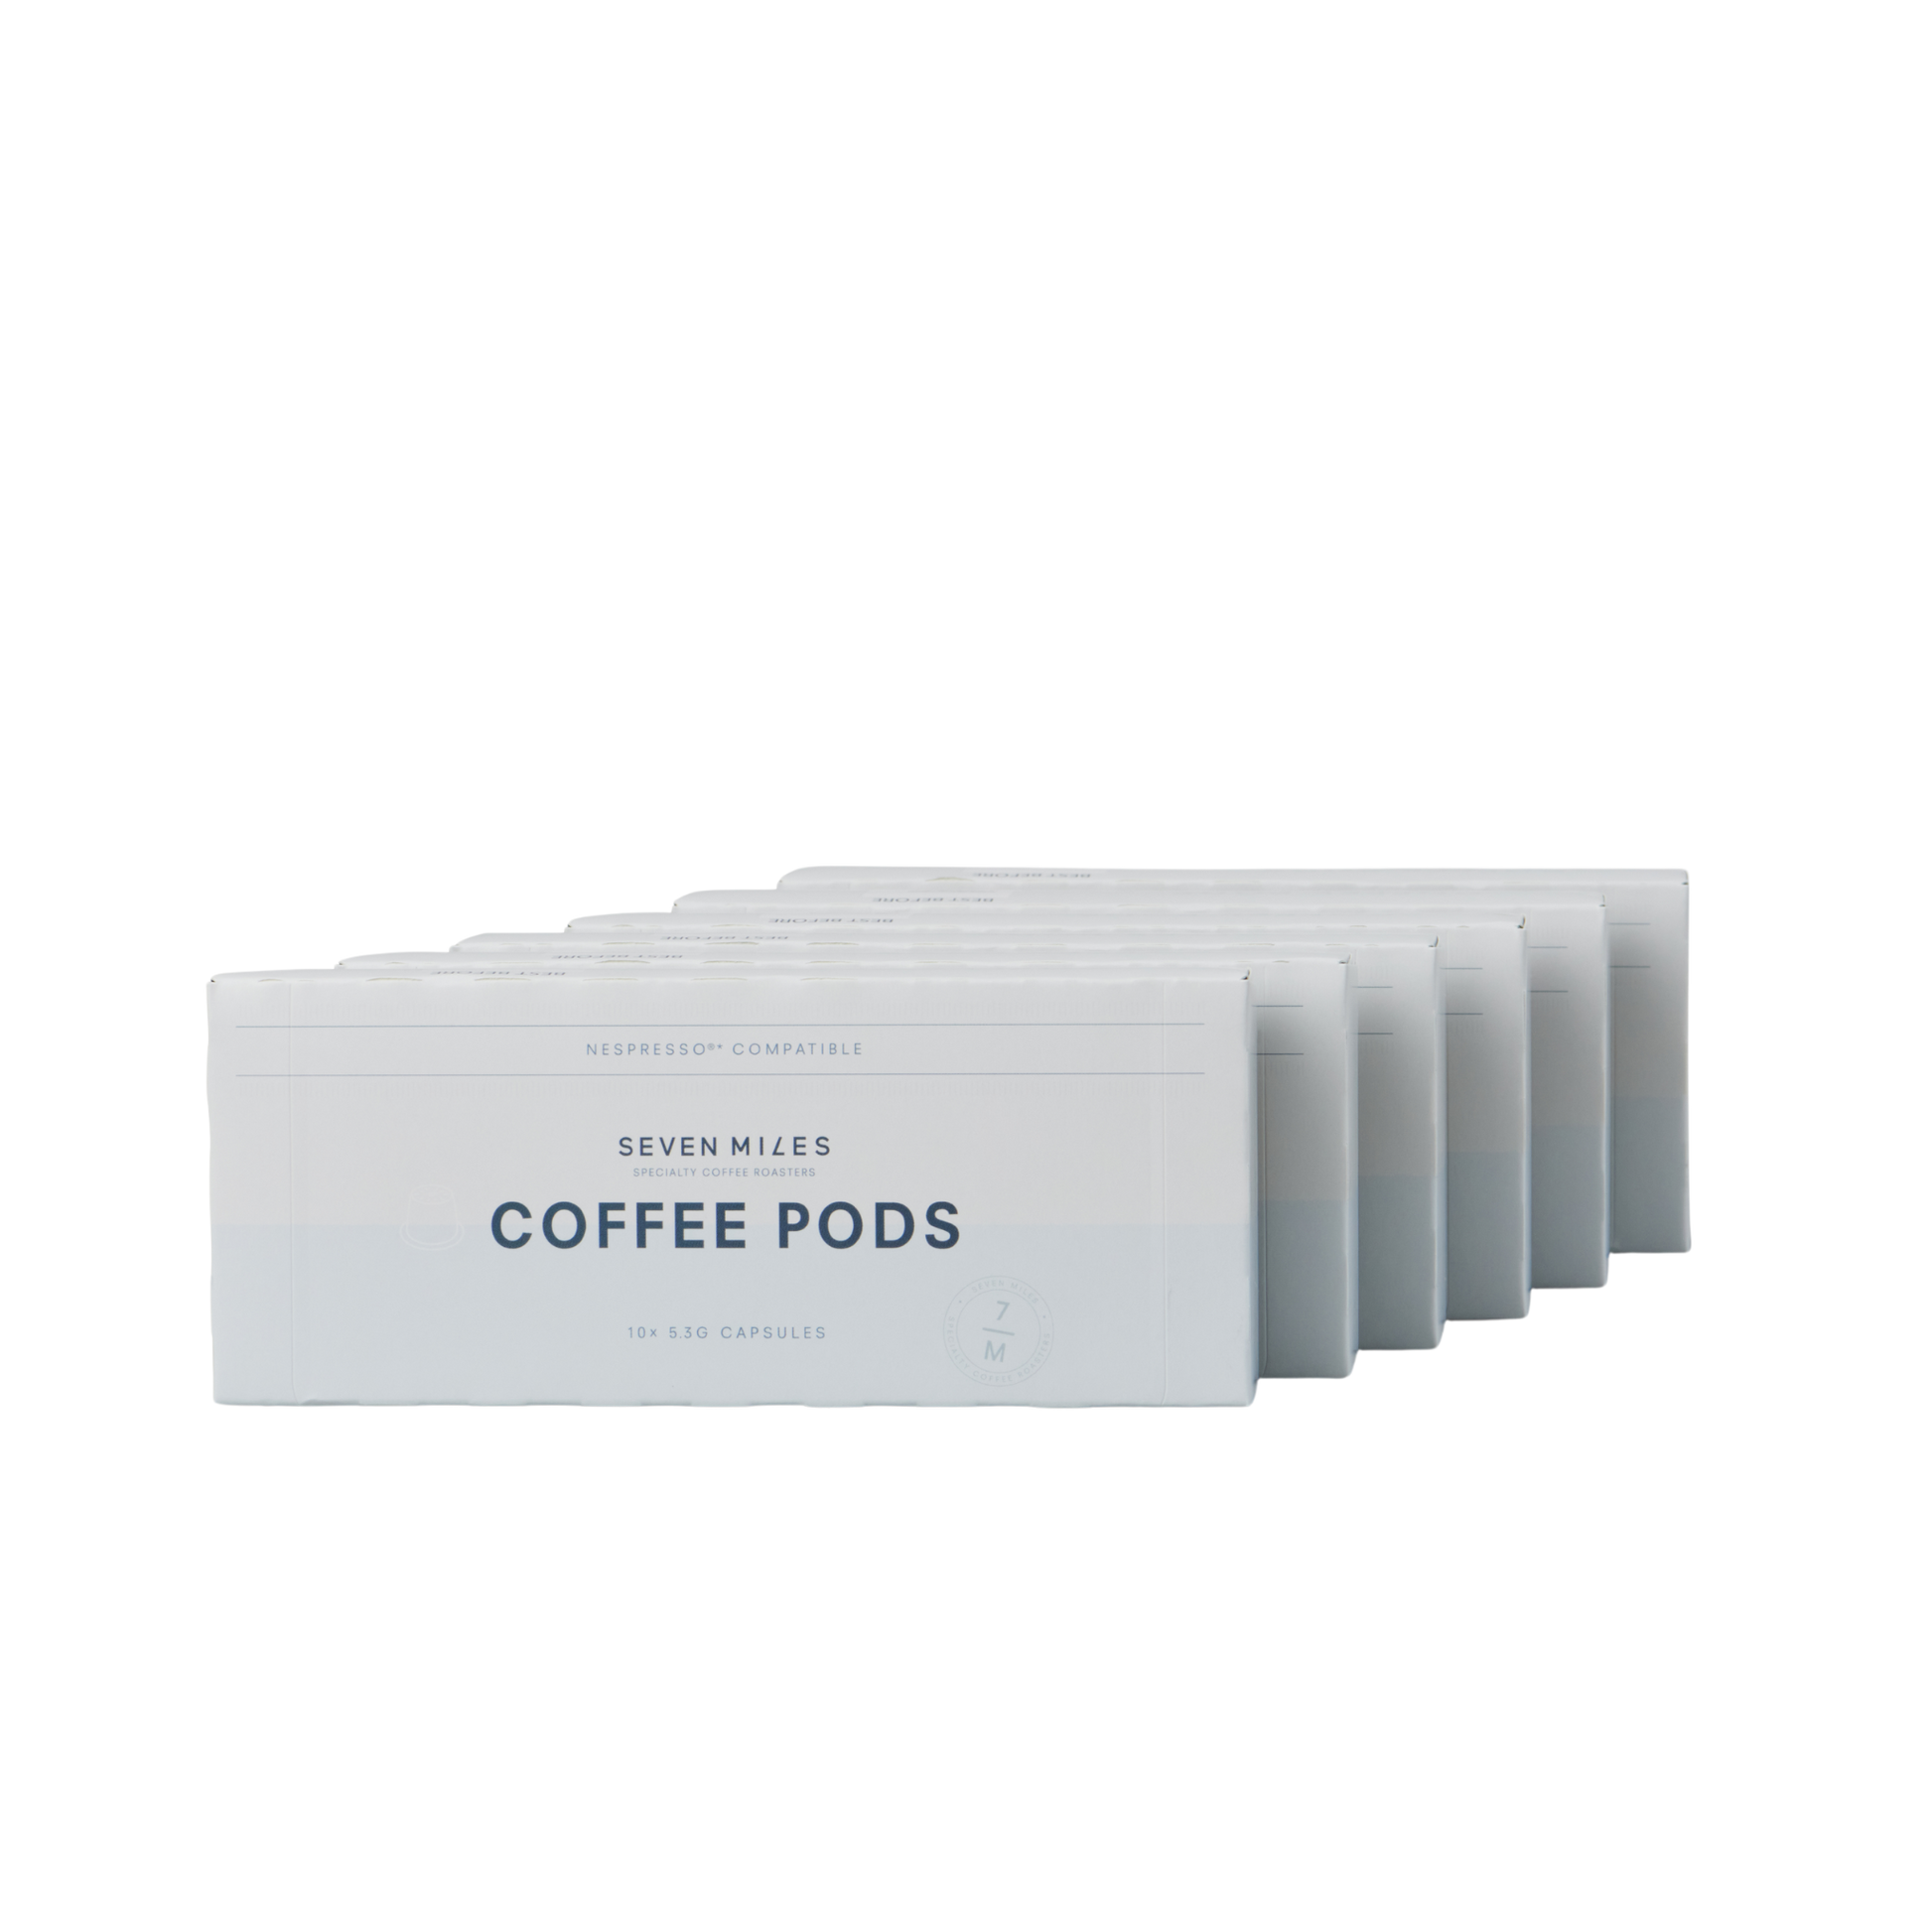 Our Classic Nespresso®* compatible coffee capsules are here to banish blandness with the deep, rich flavours of this custom blend. Perfect for drinking black or with milk.